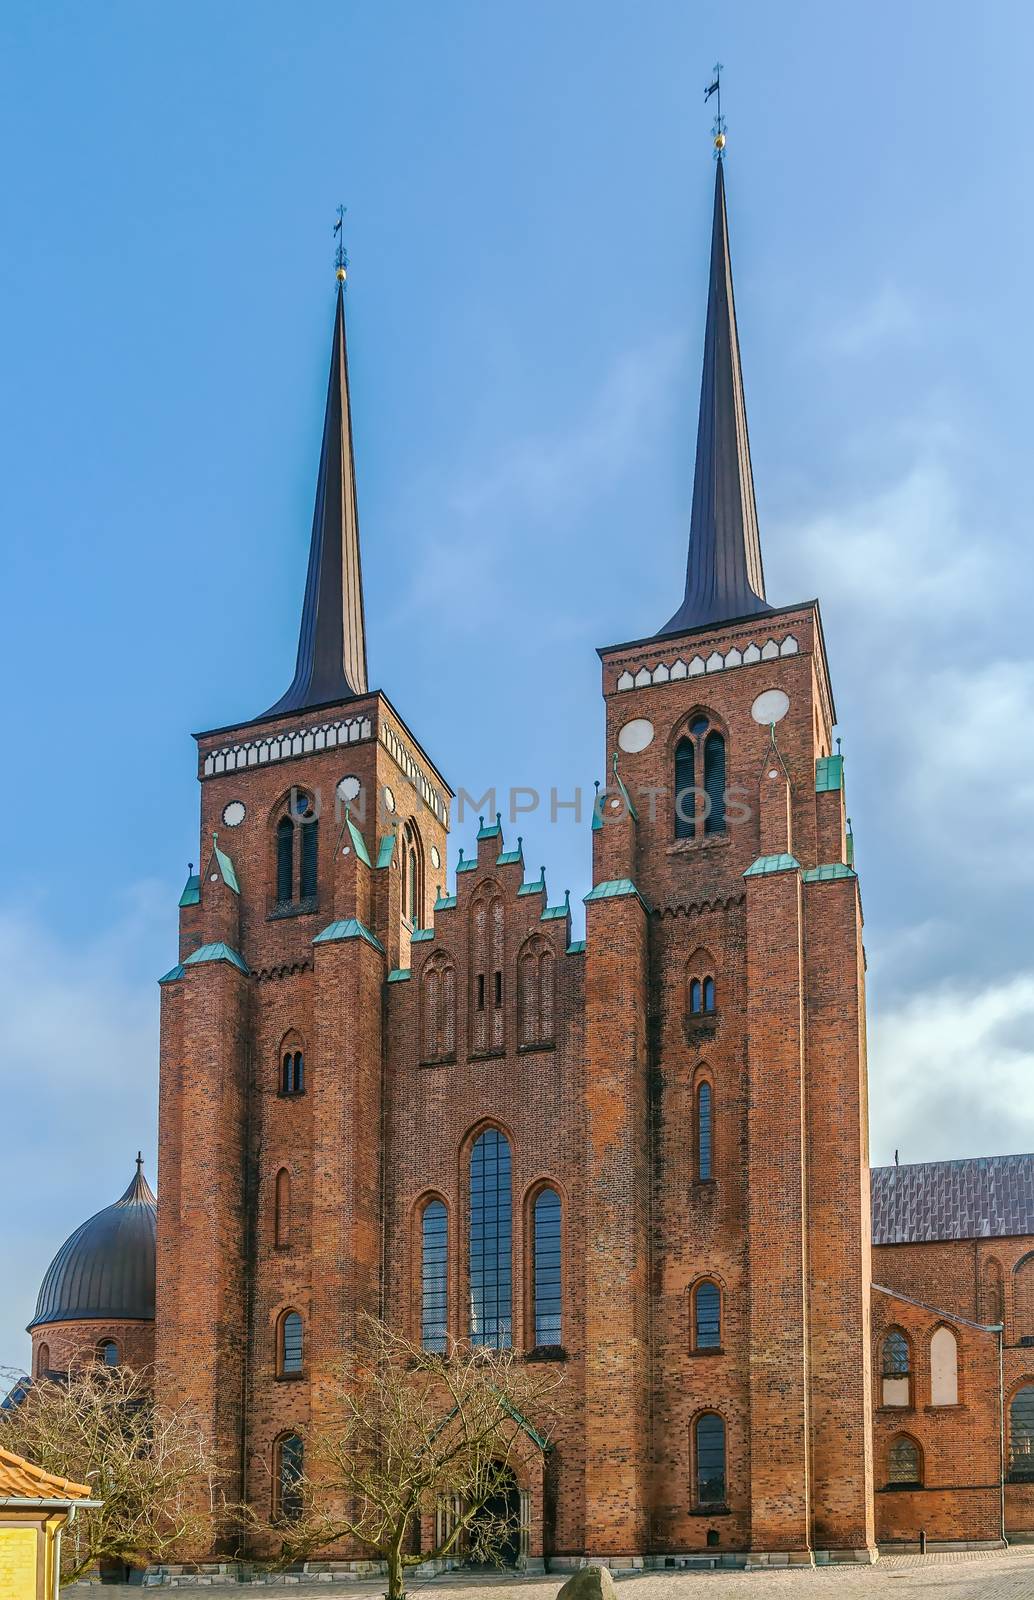 Roskilde Cathedral is a cathedral of the Lutheran Church of Denmark.  The first Gothic cathedral to be built of brick, it encouraged the spread of the Brick Gothic style throughout Northern Europe.